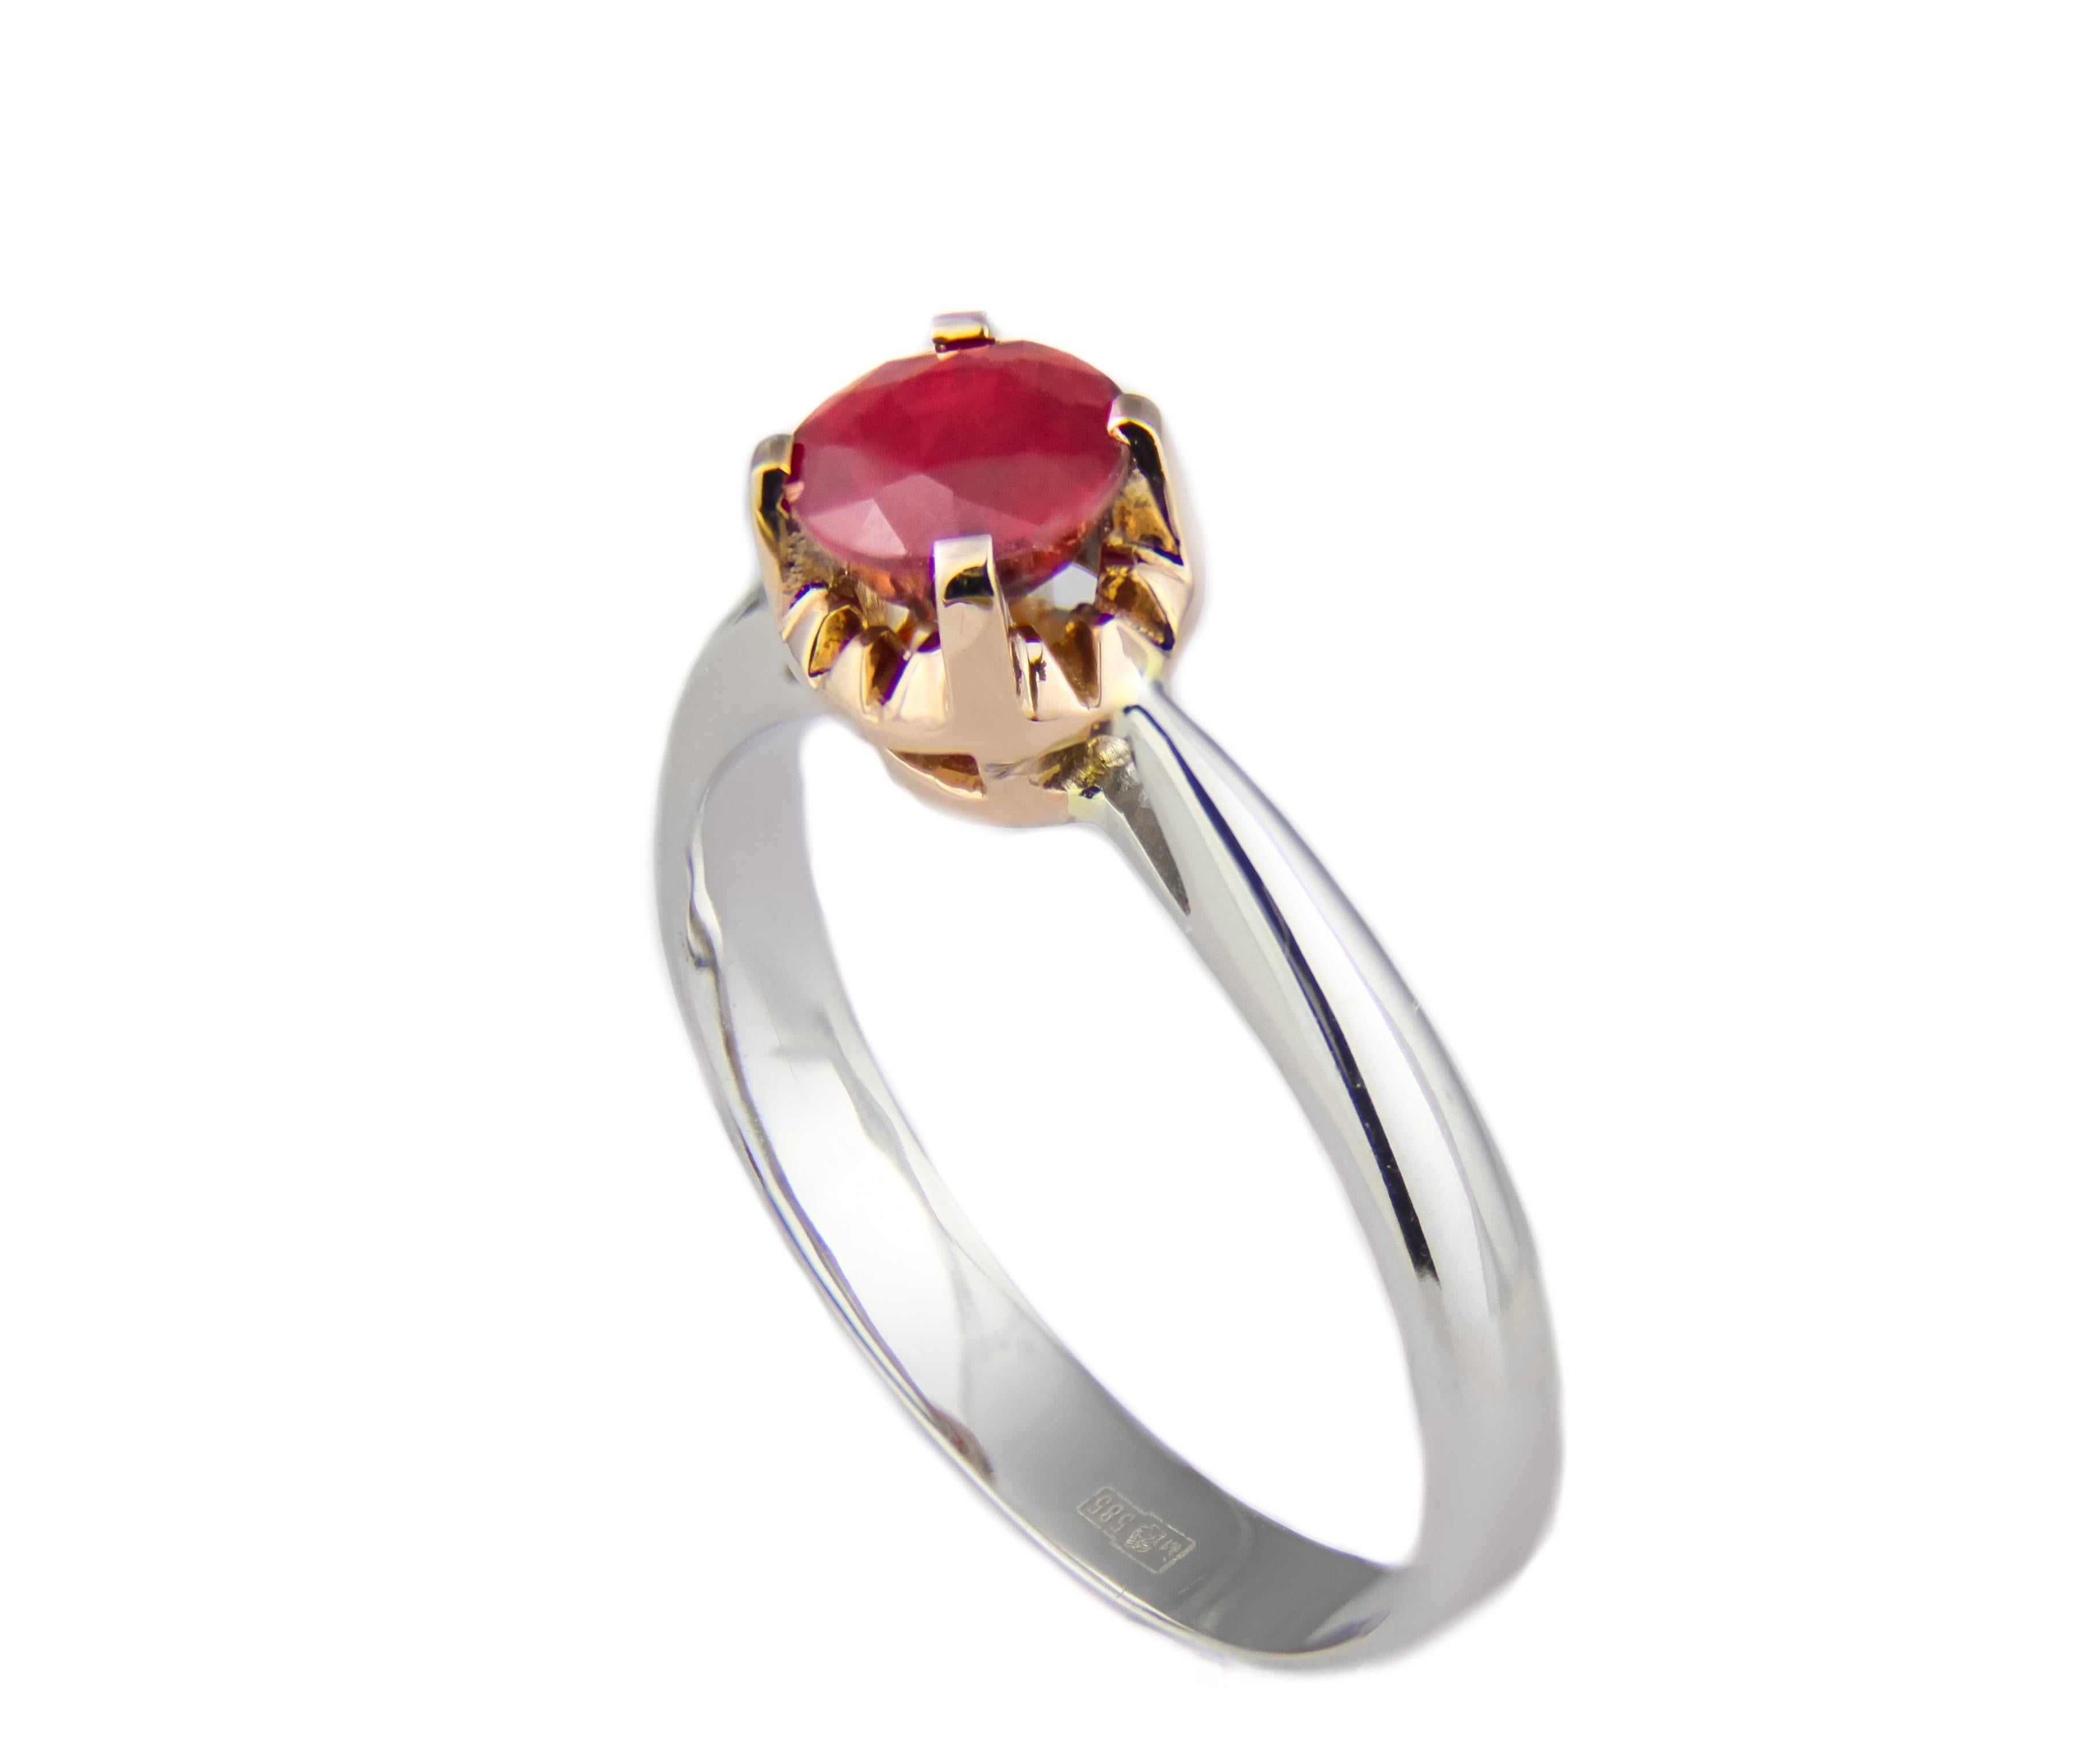 Round Cut Ruby ring in 14k gold.  For Sale